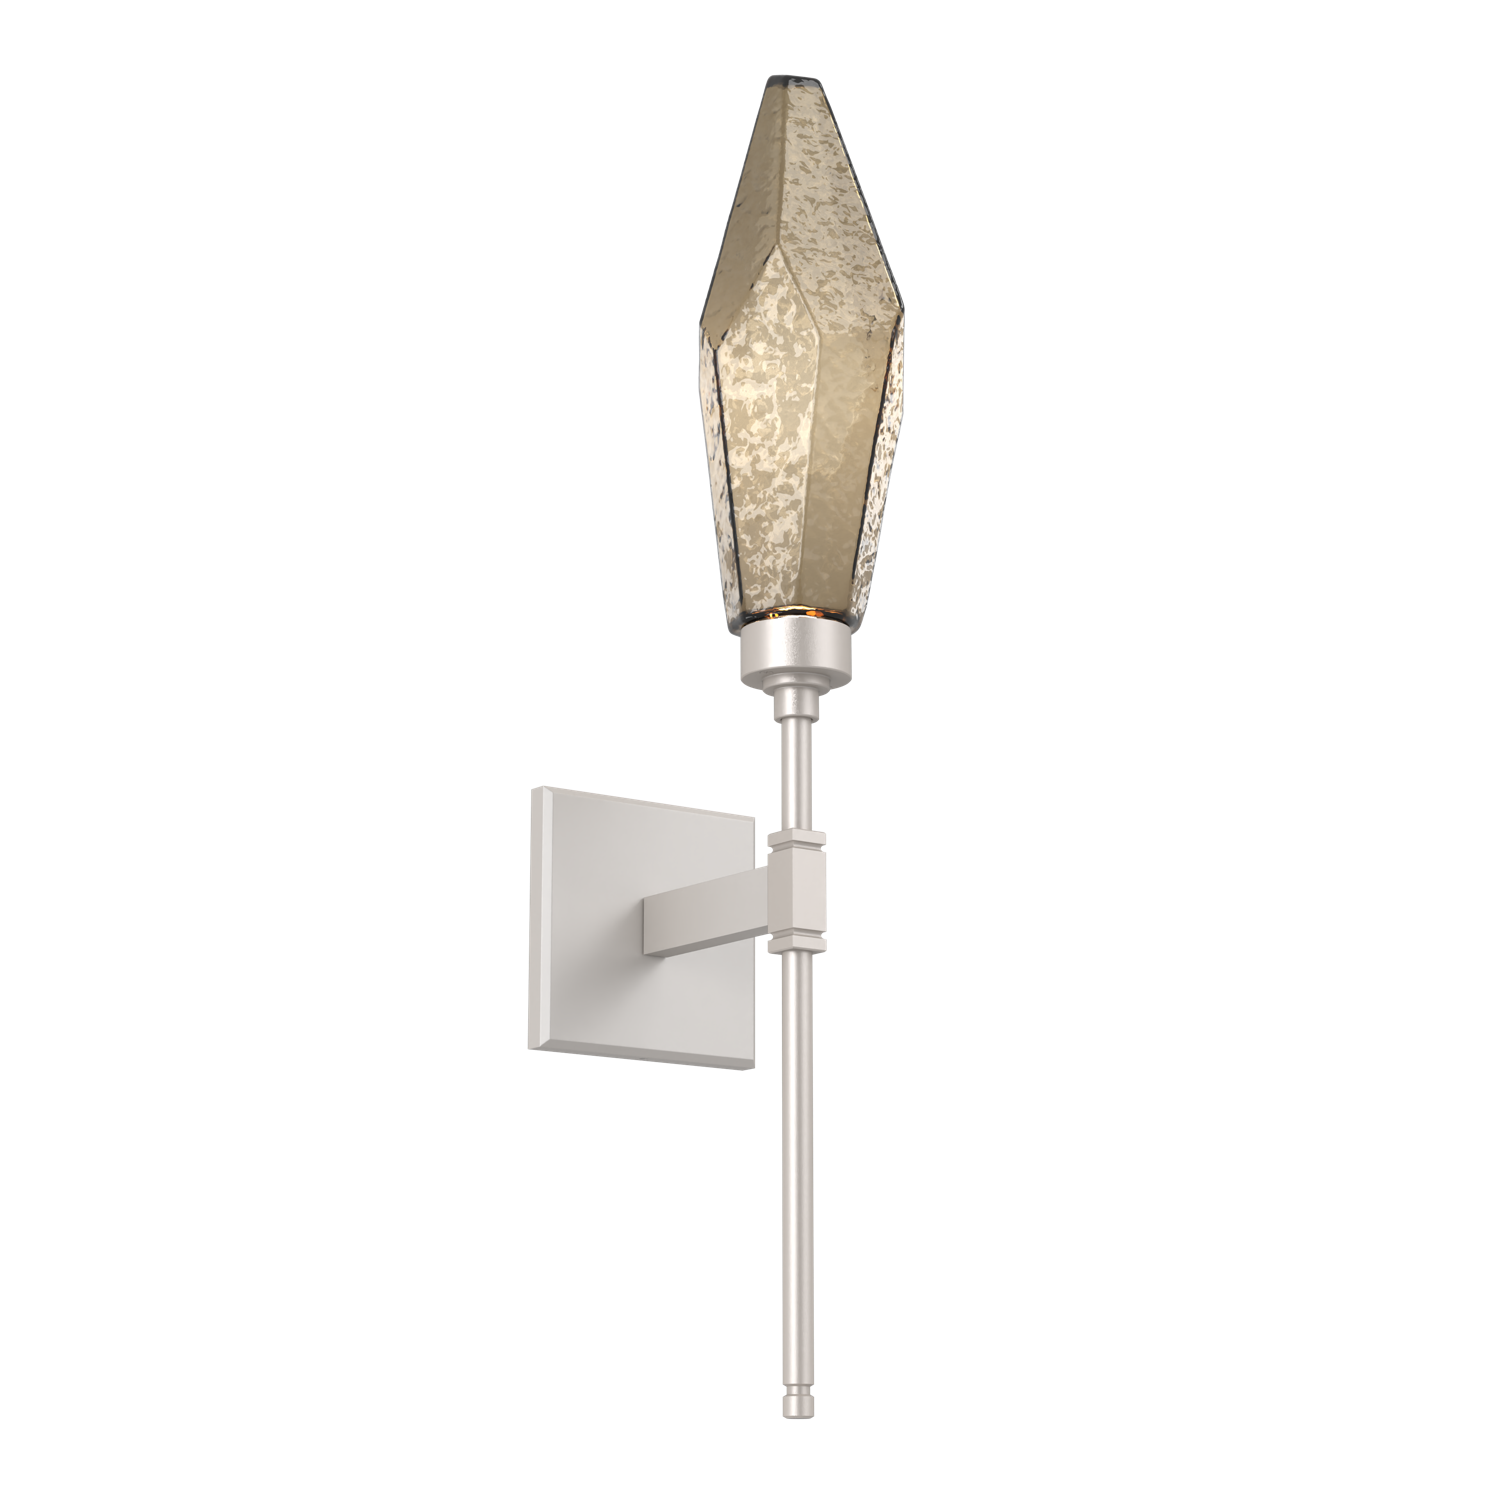 IDB0050-07-BS-CB-Hammerton-Studio-Rock-Crystal-belvedere-wall-sconce-with-beige-silver-finish-and-chilled-bronze-blown-glass-shades-and-LED-lamping